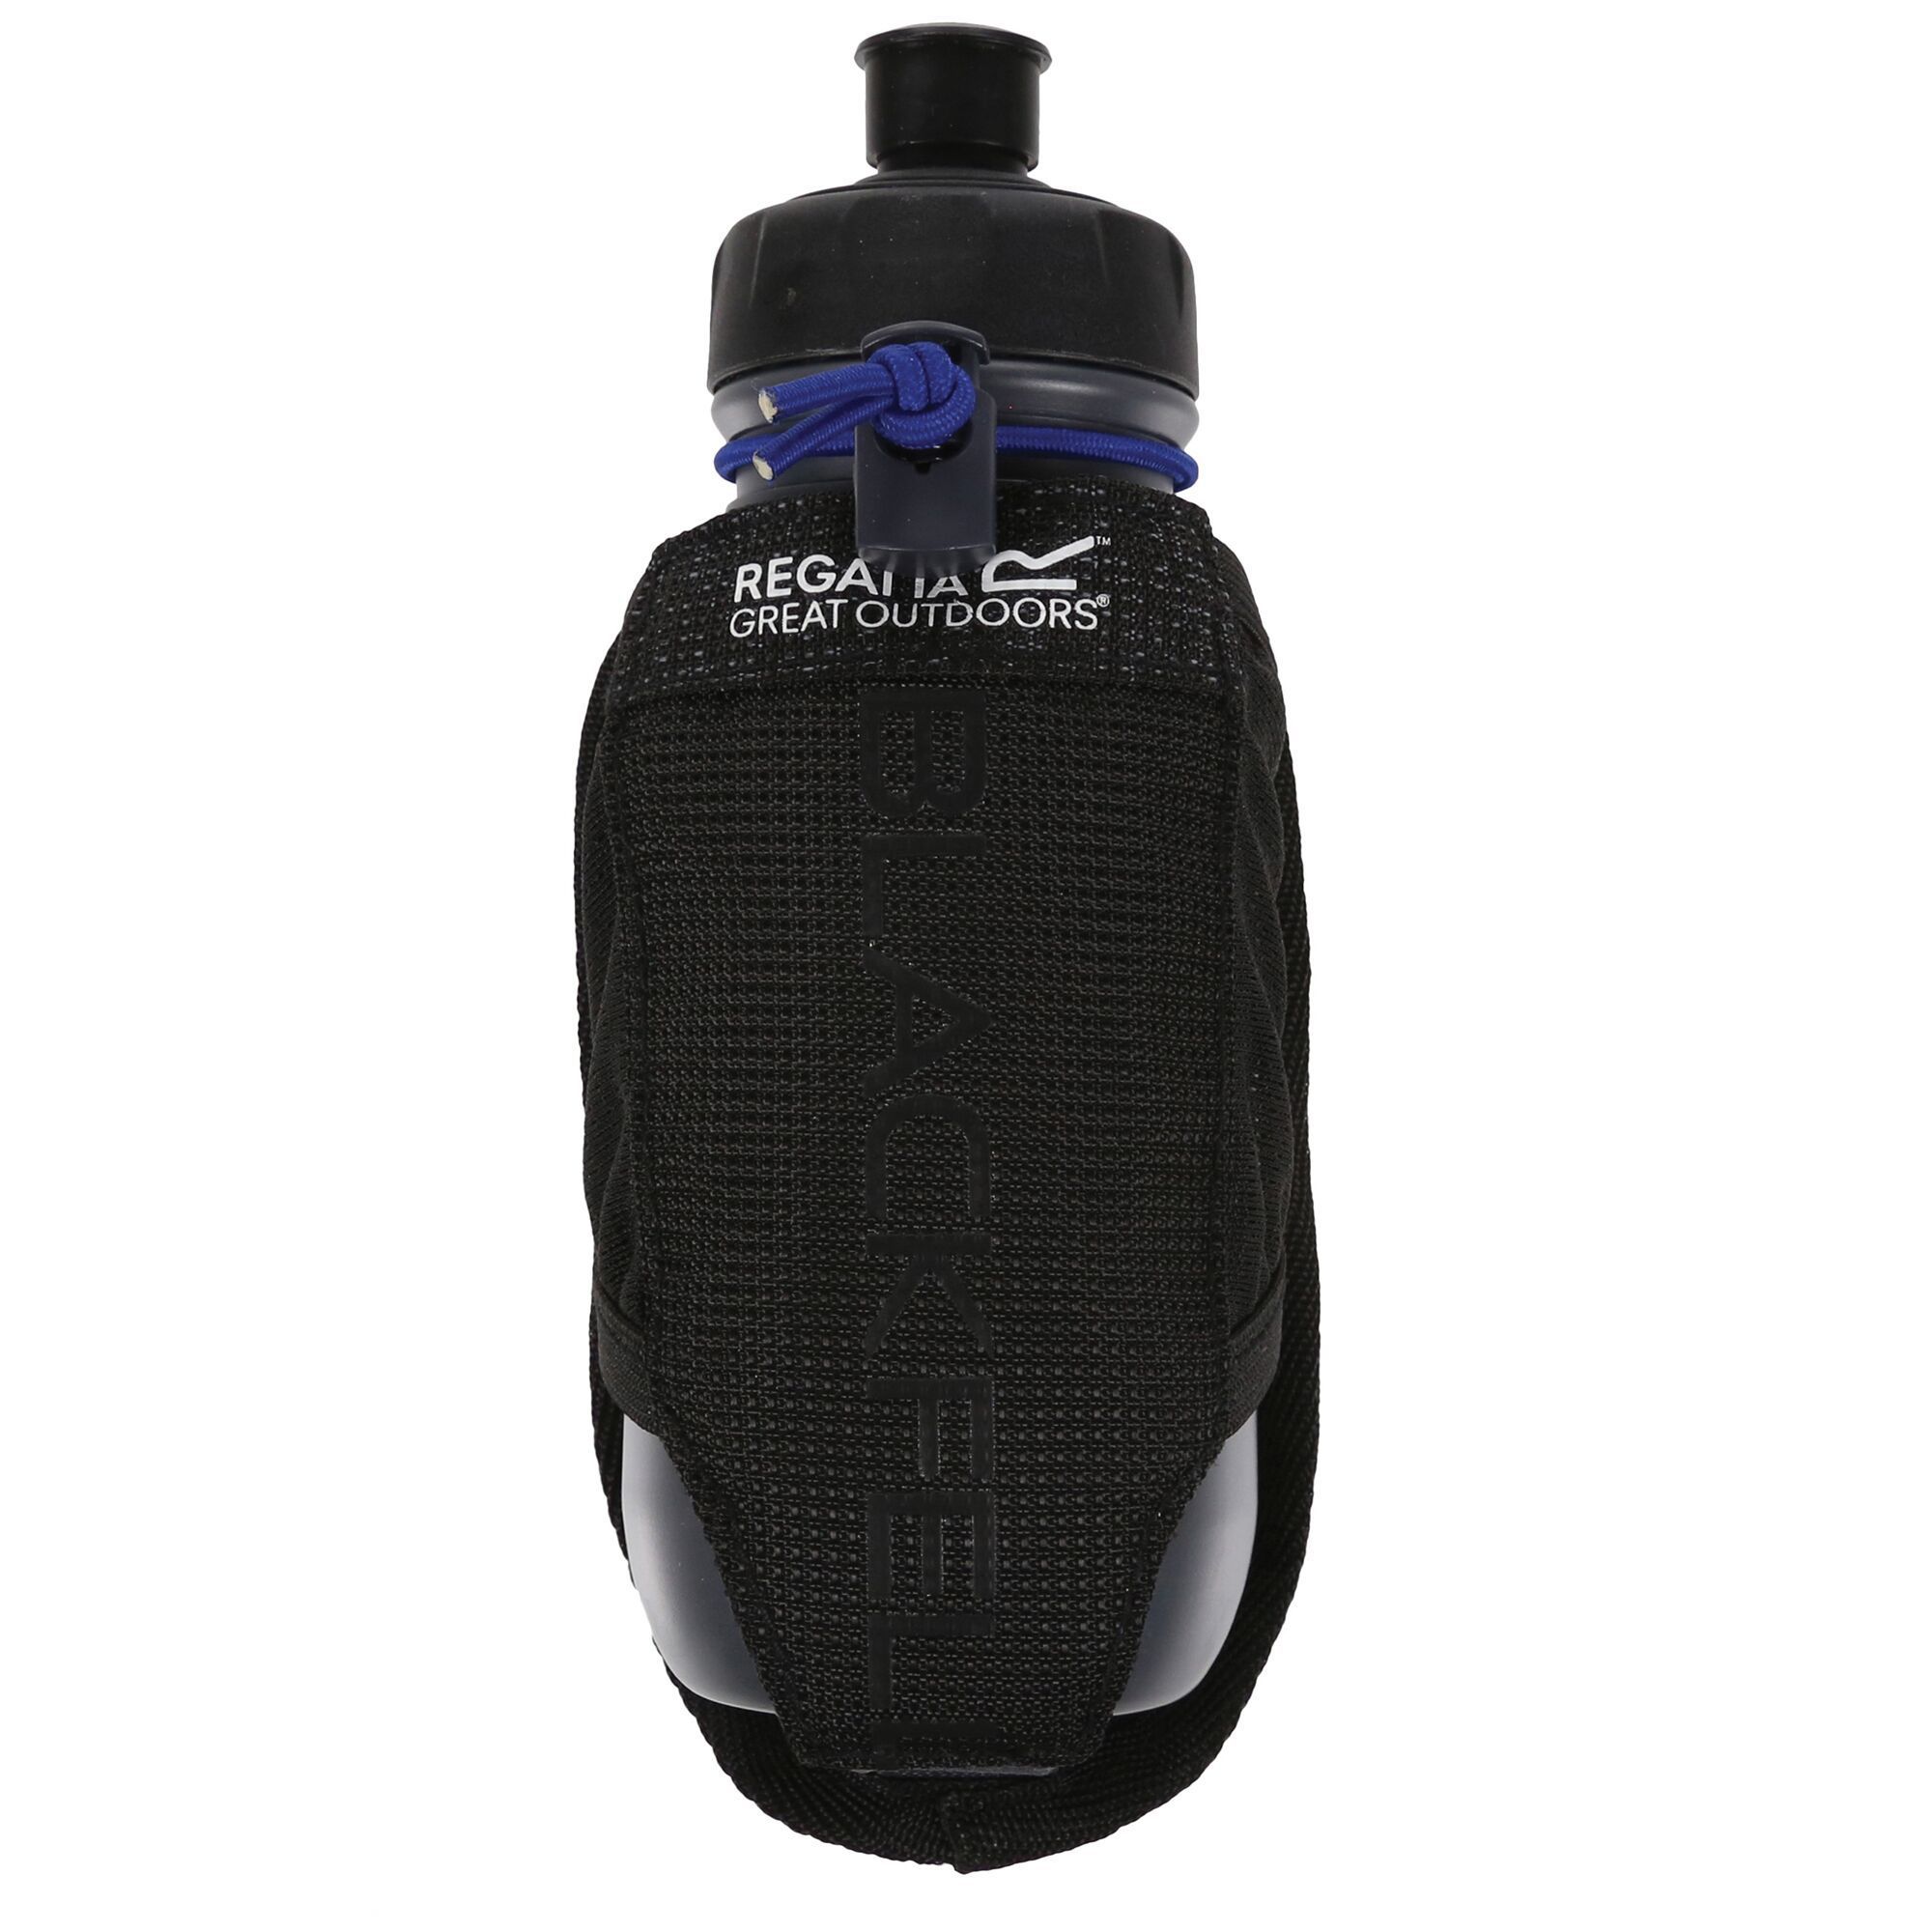 Material: (bottle) 100% synthetic / (attachment) 100% polyester. Highly reflective printed panels in strategic zones for enhanced visibility. Hardwearing polyester fabric. Bottle holder with retainer. Includes water bottle. Polyester stretch side panels. Adjustable webbing loops to attach to backpack.